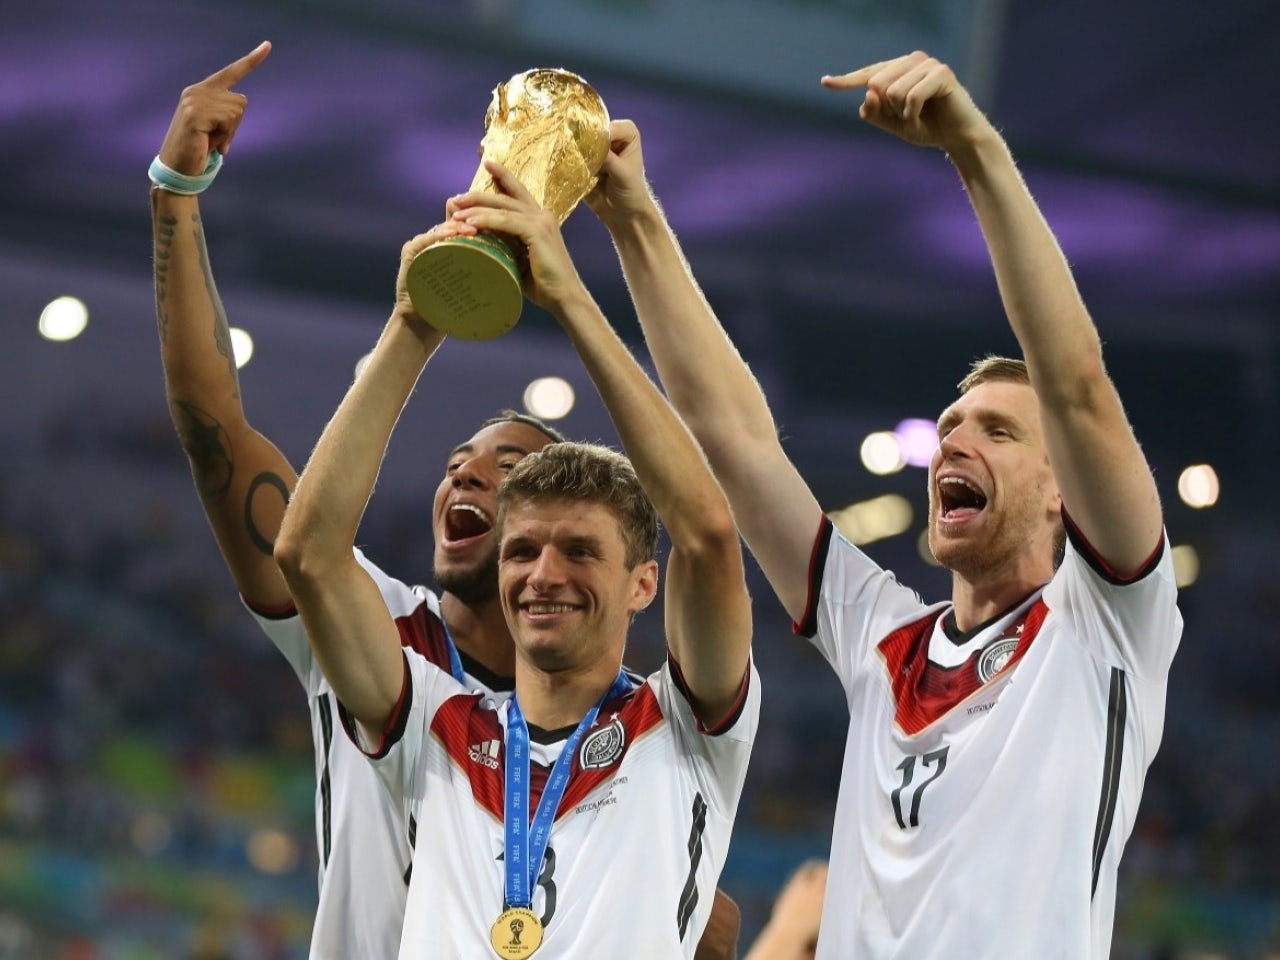 Germany legend with 131 caps confirms international retirement with video message